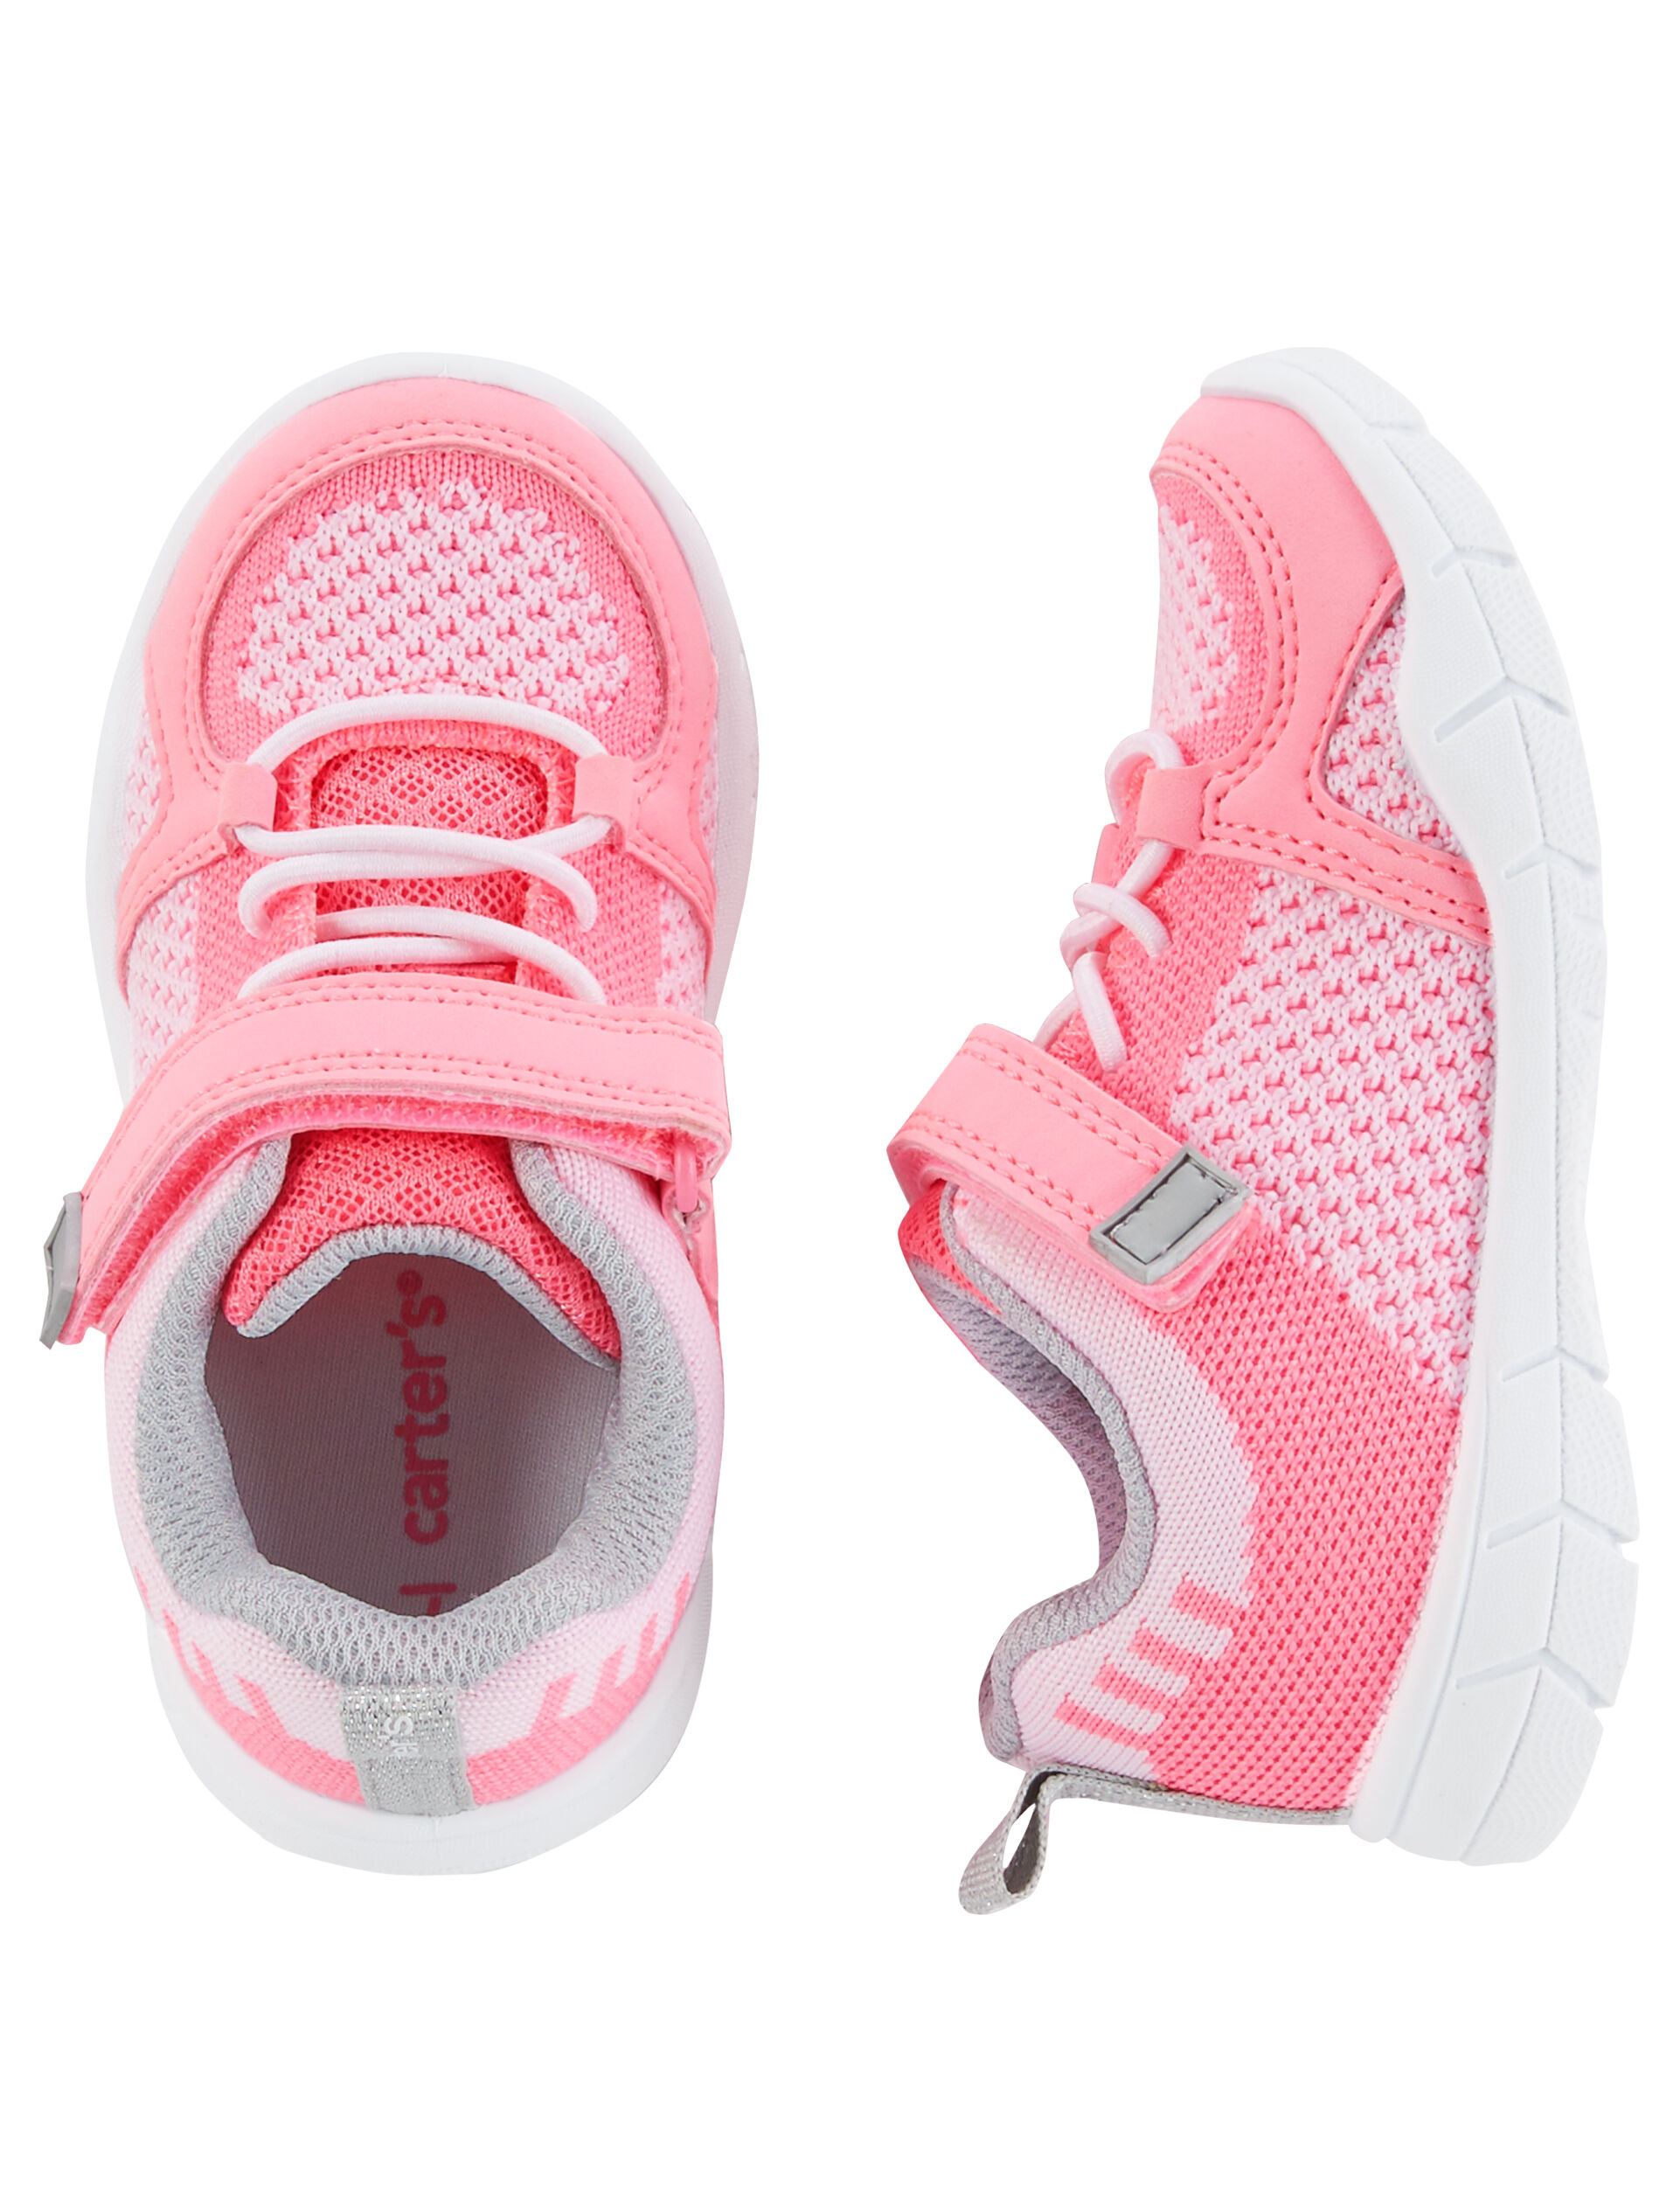 carter's athletic sneakers